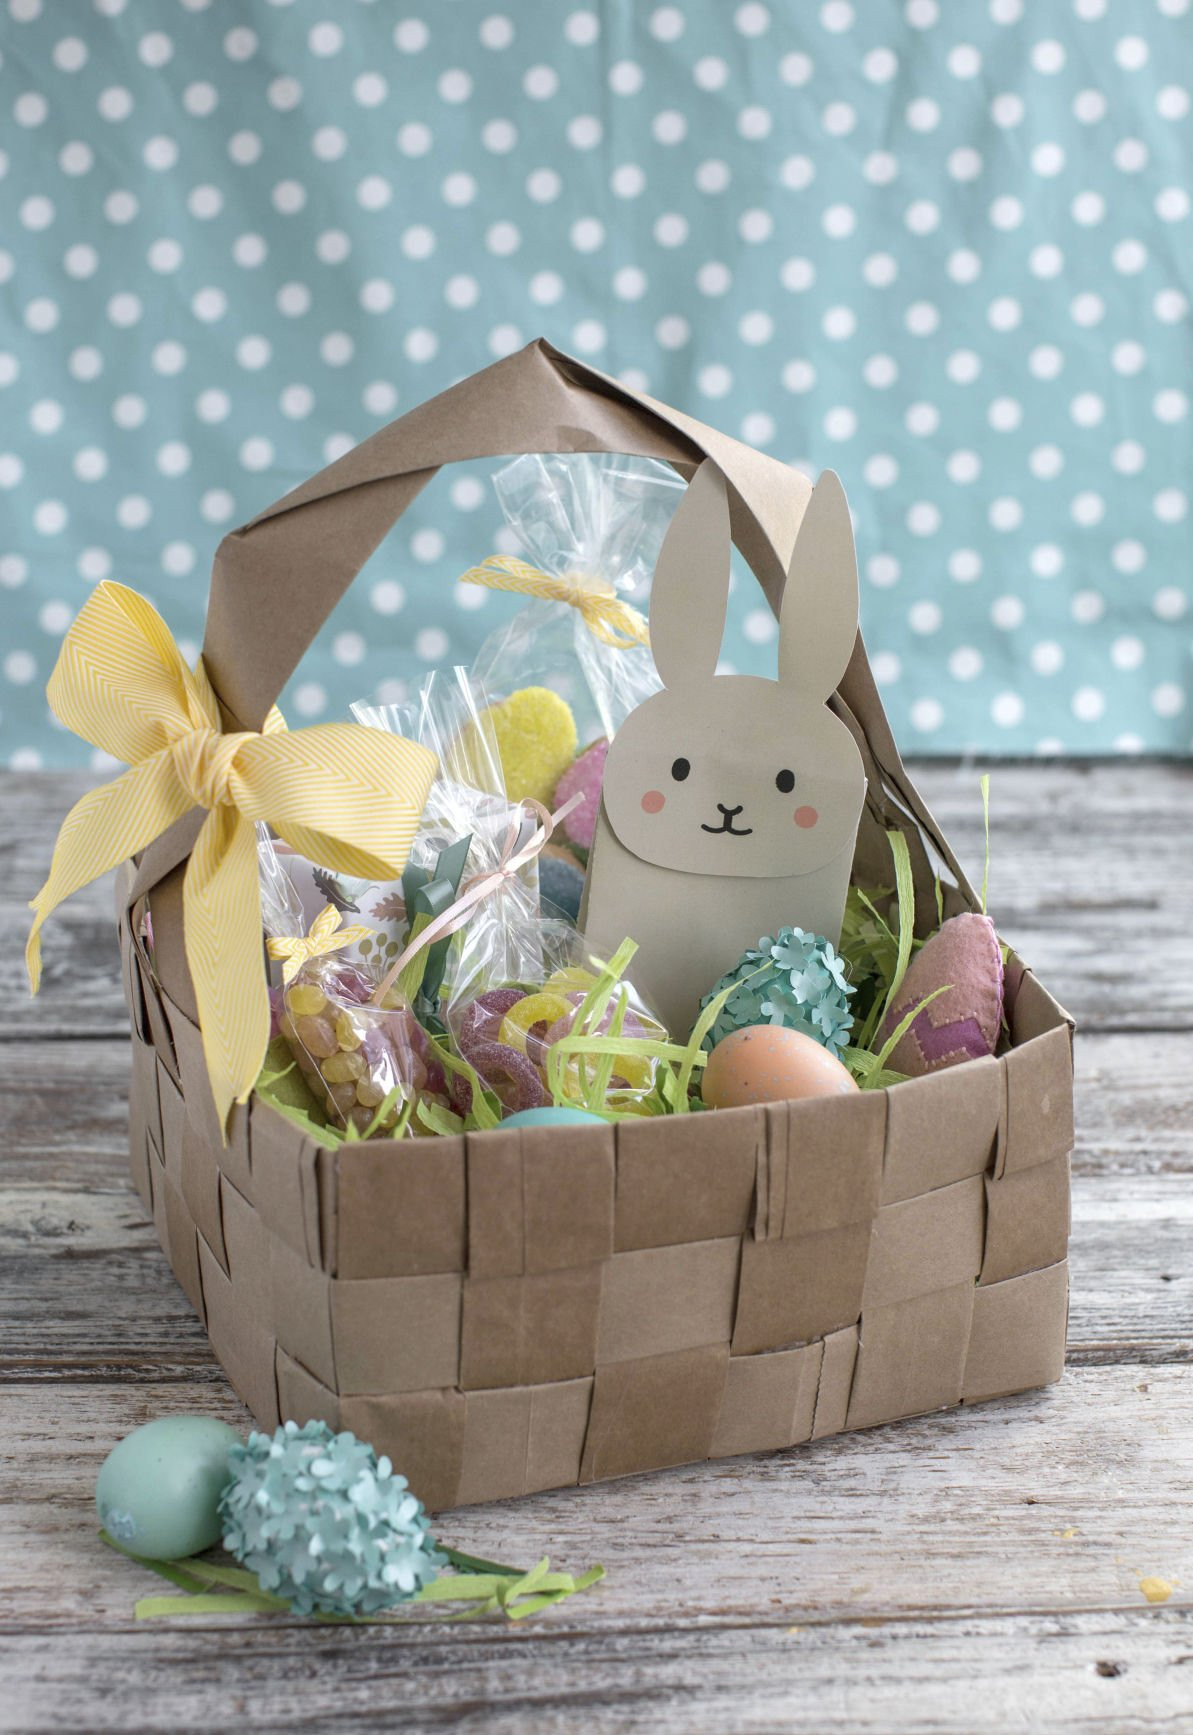 Easter Diy Projects
 Hop to it 5 ways to creative with Easter baskets